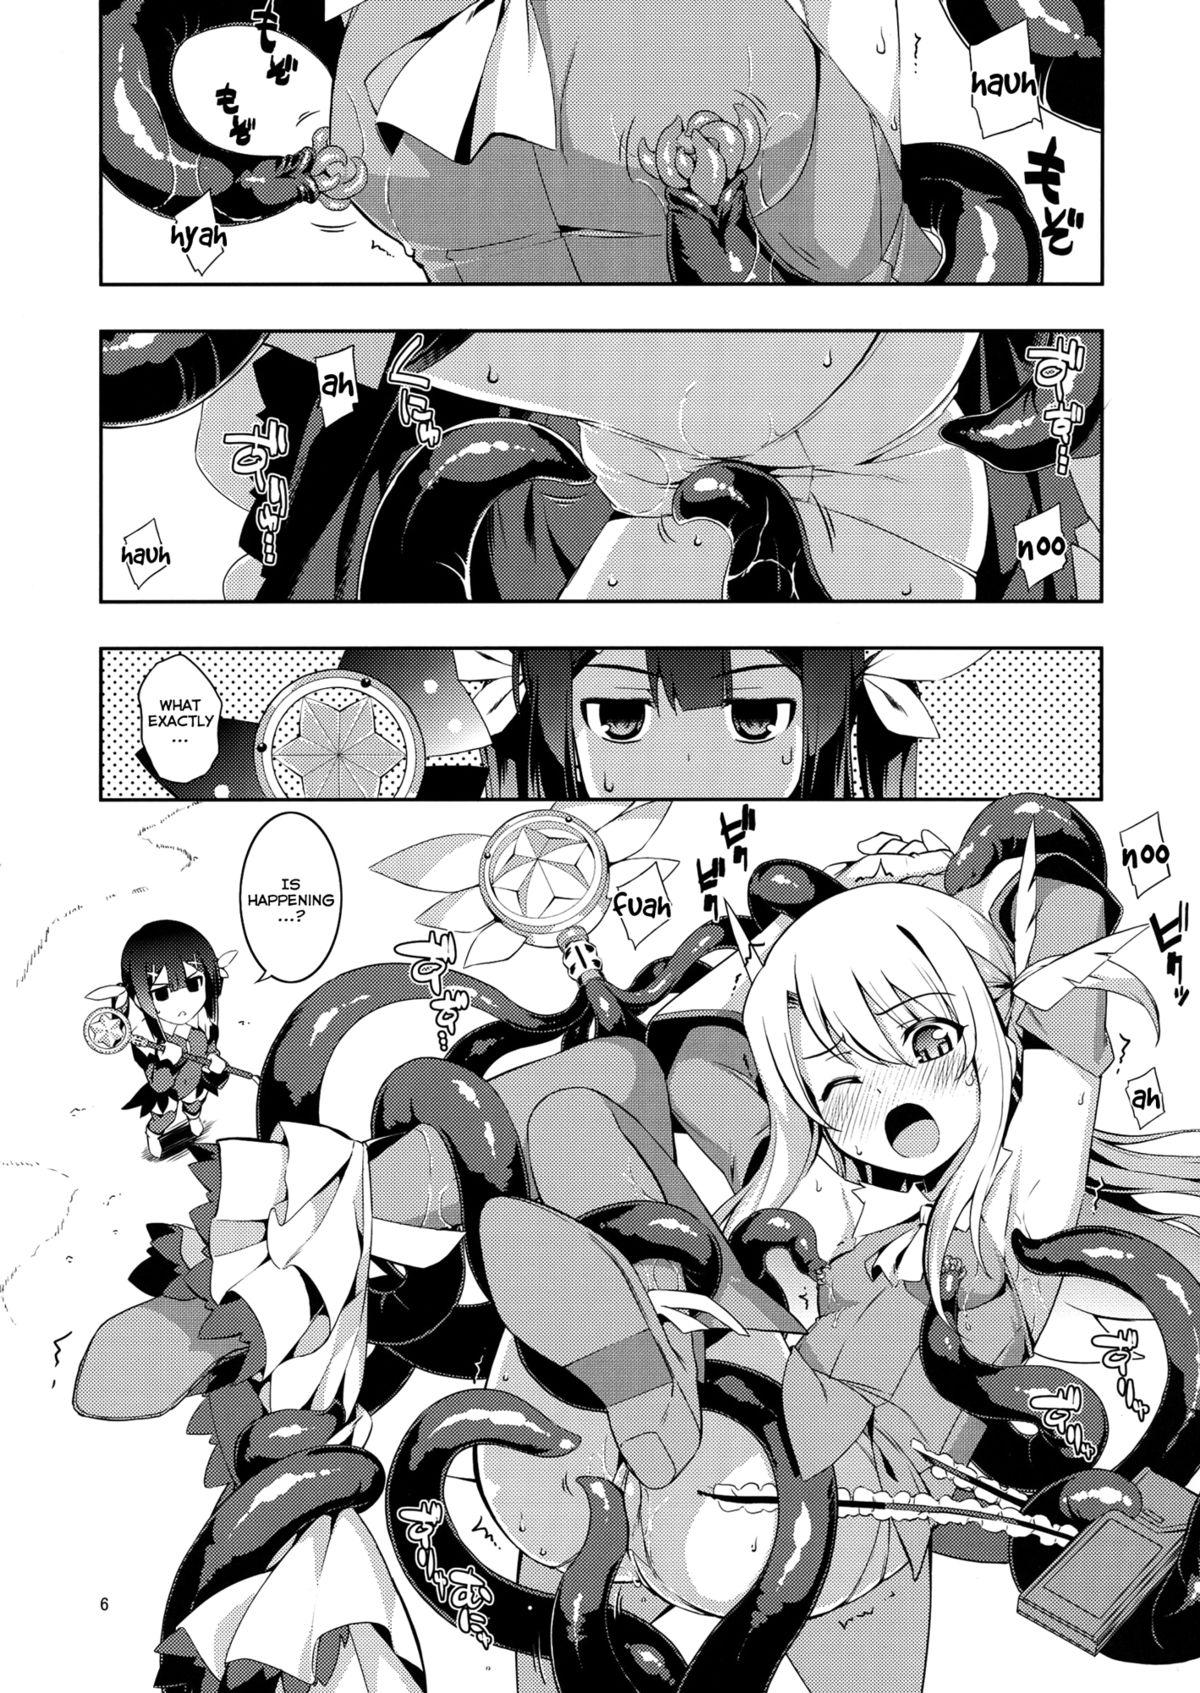 Perra RE 18 - Fate kaleid liner prisma illya African - Page 6